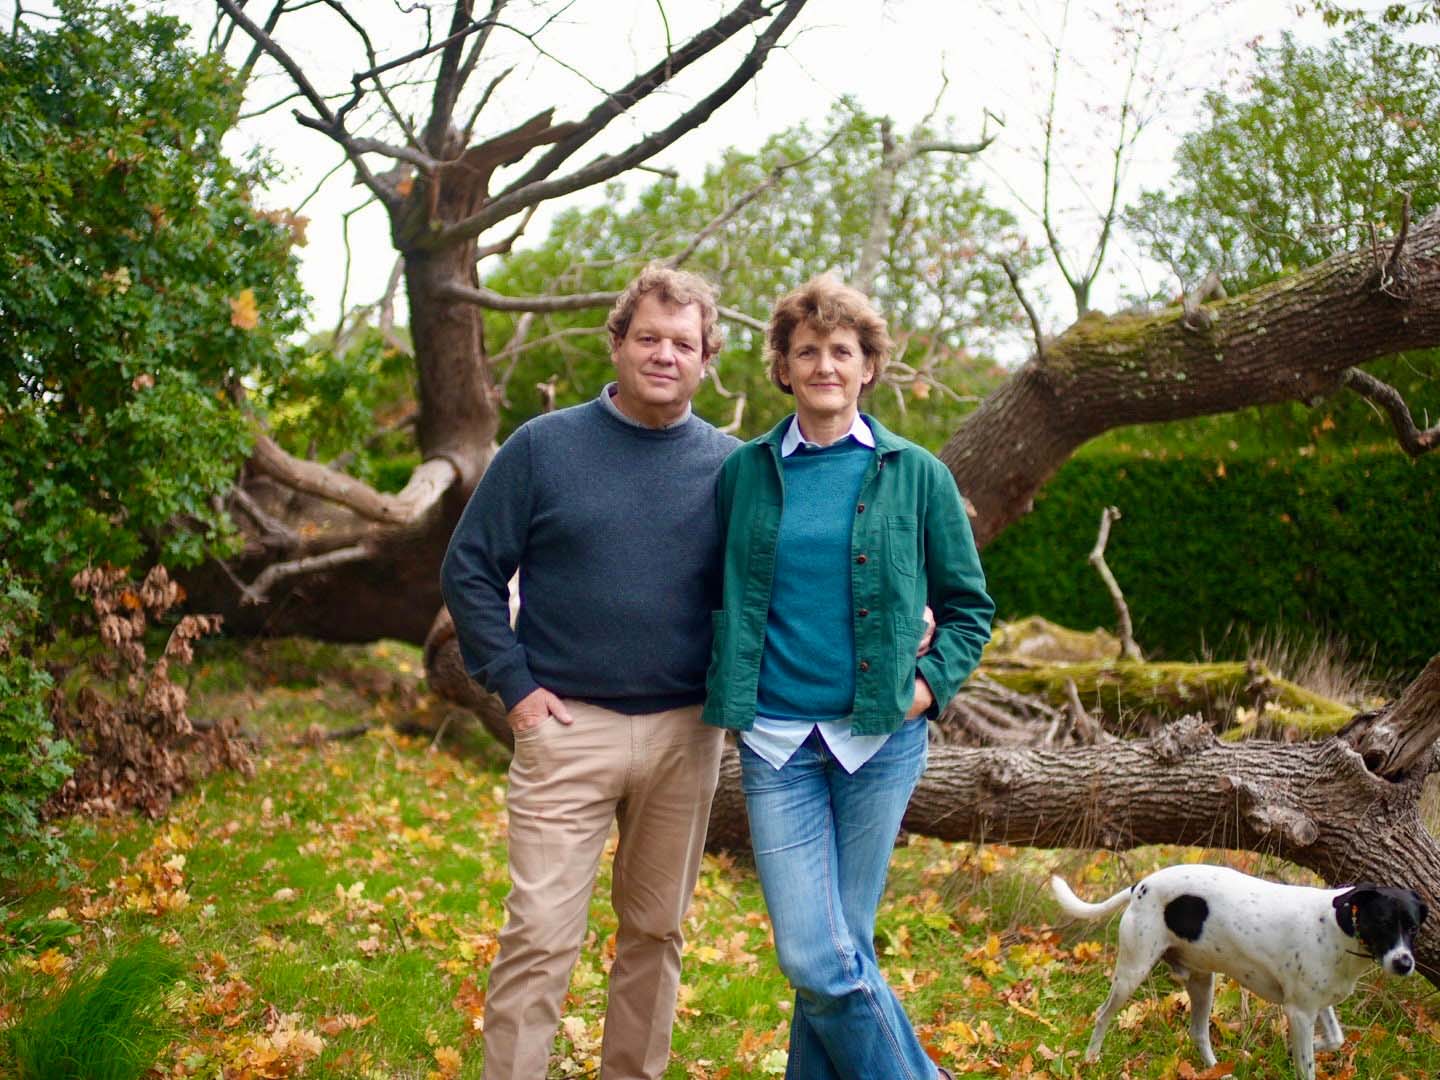 Two people standing outdoors in front of a fallen tree. A dog is walking around next to them